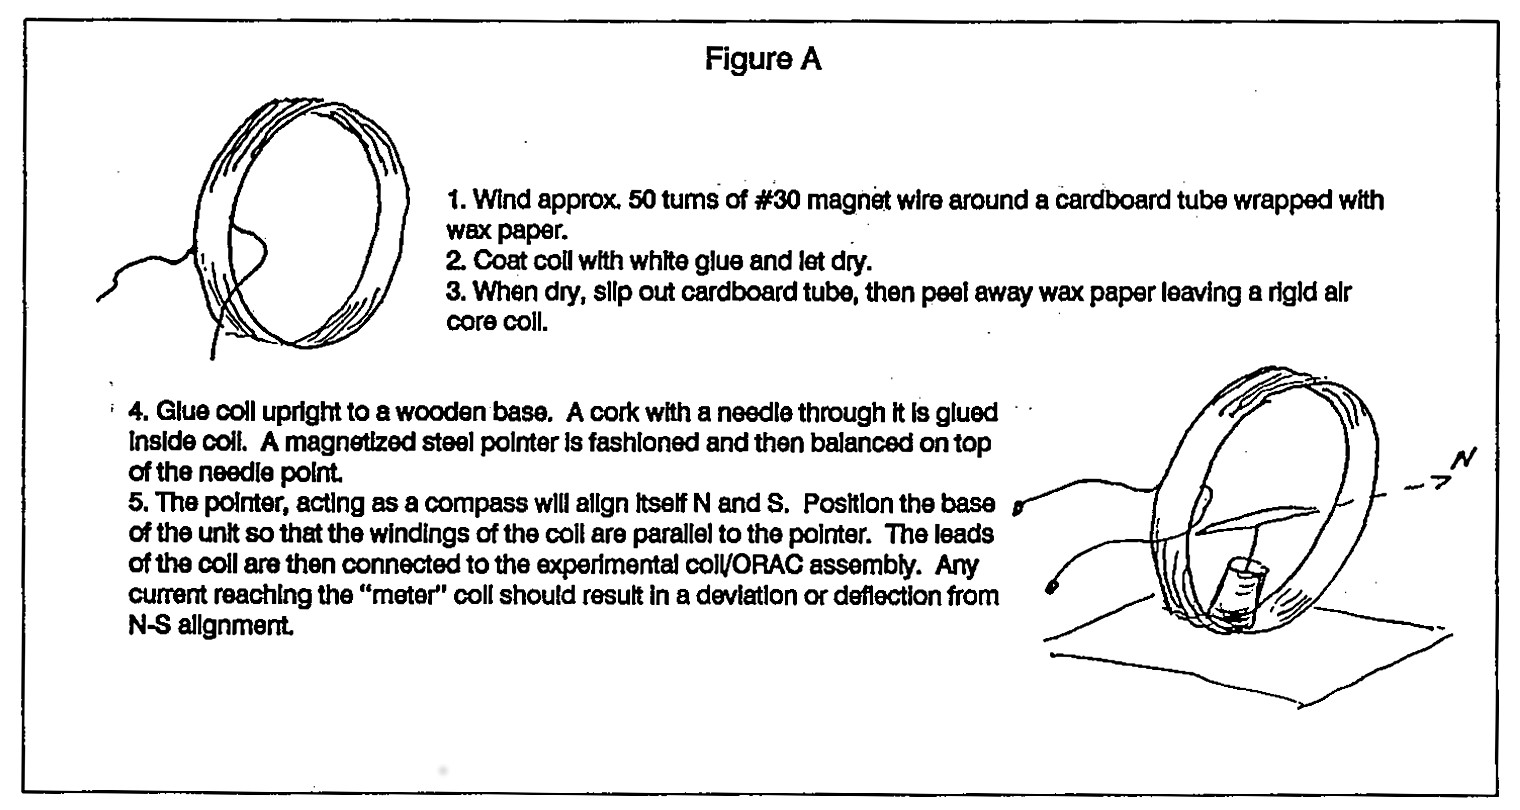 (FIGURE A) 1. Wind approx. 50 turns of #30 magnet wire around a cardboard tube wrapped with wax paper. 2. Coat coil with white glue and let dry. 3. When dry, slip out cardboard tube, then peel away wax paper leaving a rigid air core coil. 4. Glue coil upright to a wooden base. A cork with a needle through it is glued inside coil. A magnetized steel pointer is fashioned and then balanced on top of the needle point. 5. The pointer, acting as a compass, will align itself N and S. position the base of the unit so that the windings of the coil are parallel to the pointer. The leads of the coil are then connected to the experimental coil/ORAC assembly. Any current reaching the "meter" coil should result in a deviation or deflection from N-S alignment.